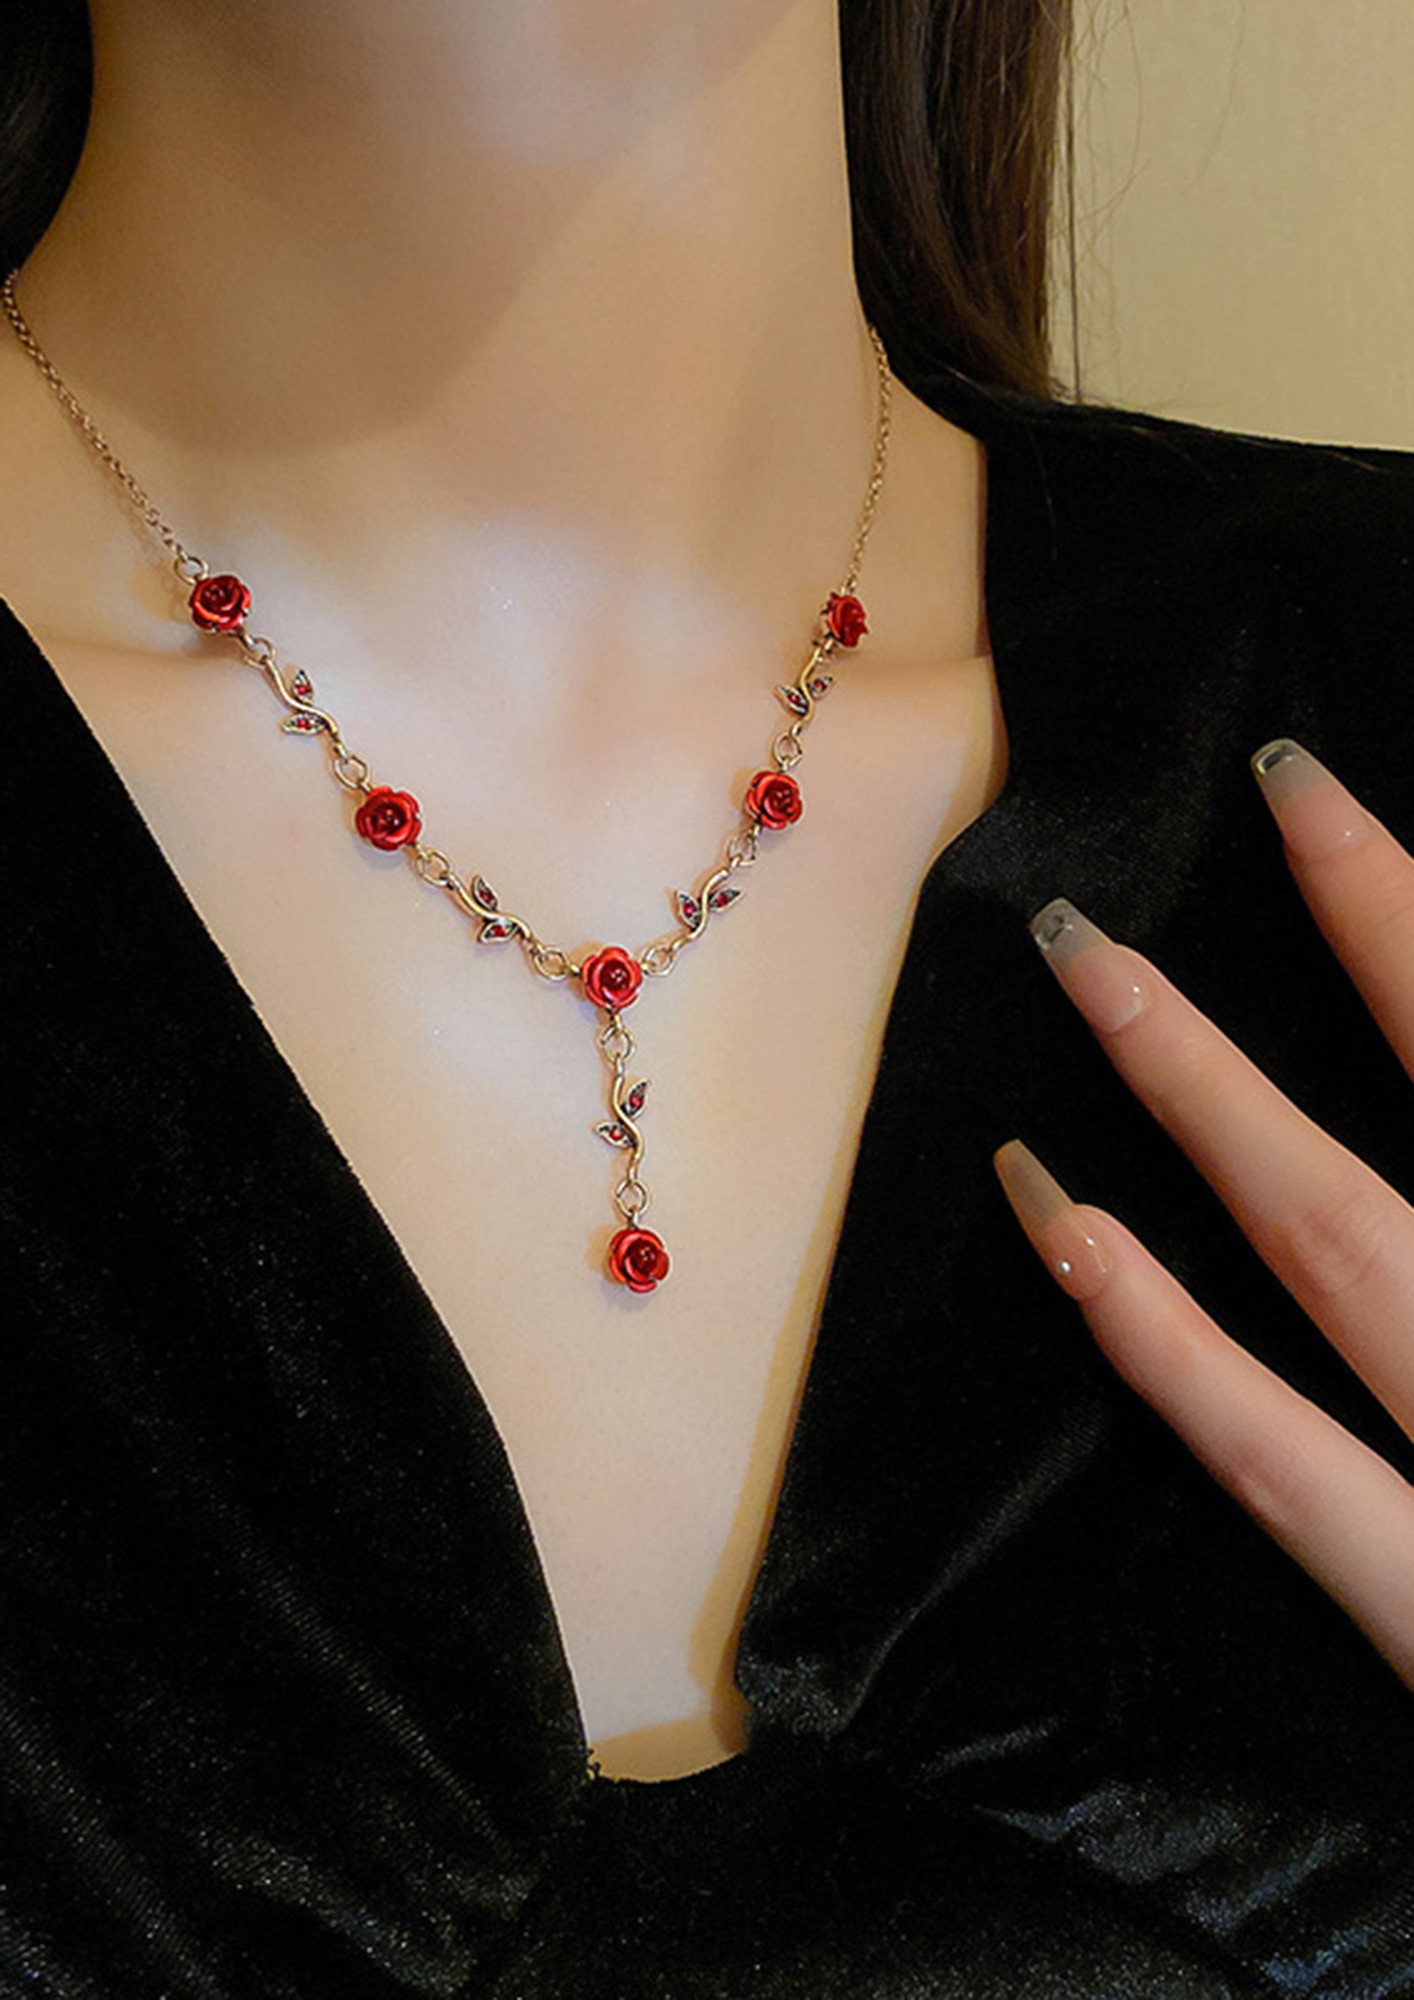 A ROSEY MOMENT NECKLACE